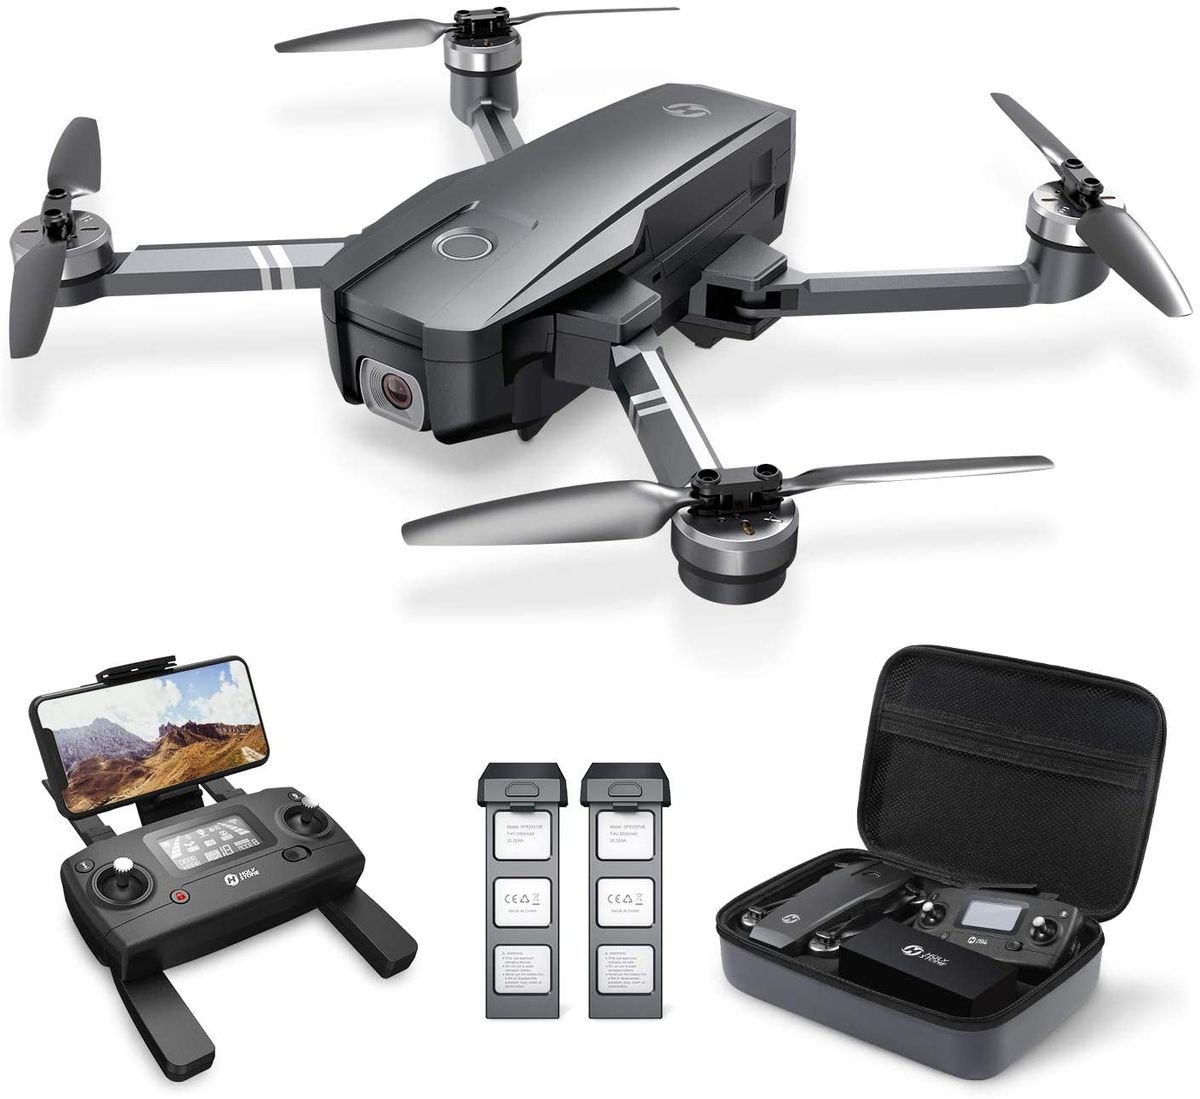 Drone discount: Save $52 on the Holy Stone HS720 on Amazon | Space